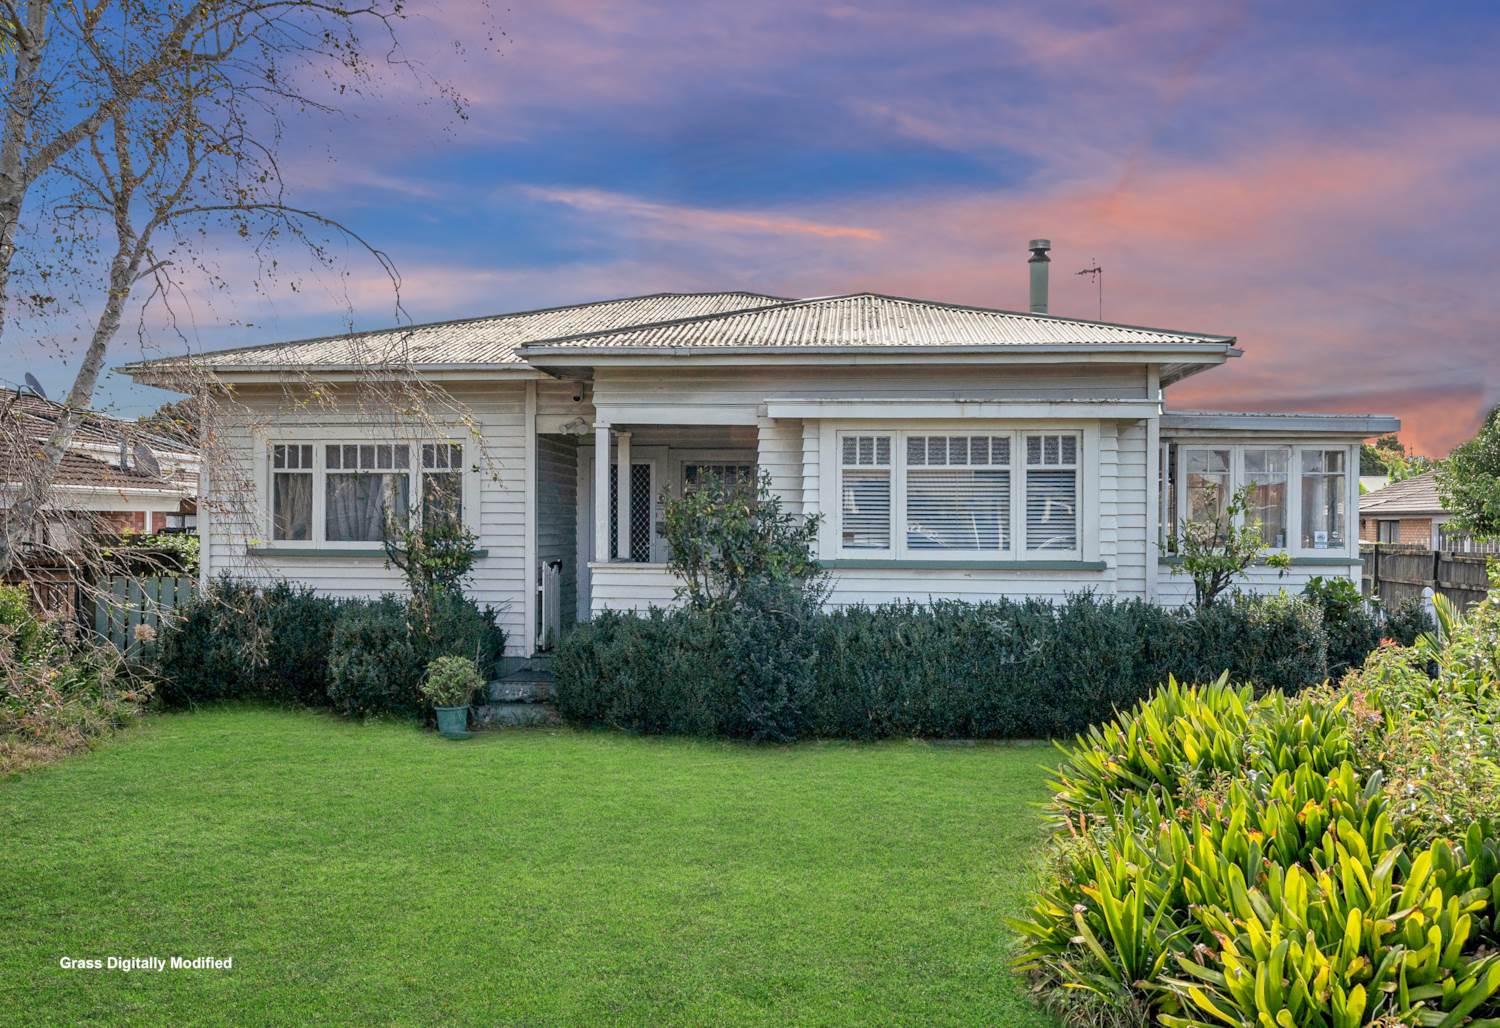 3 Bedroom Native Timber Character Bungalow – ID 150PAPATOETOE Cover Image